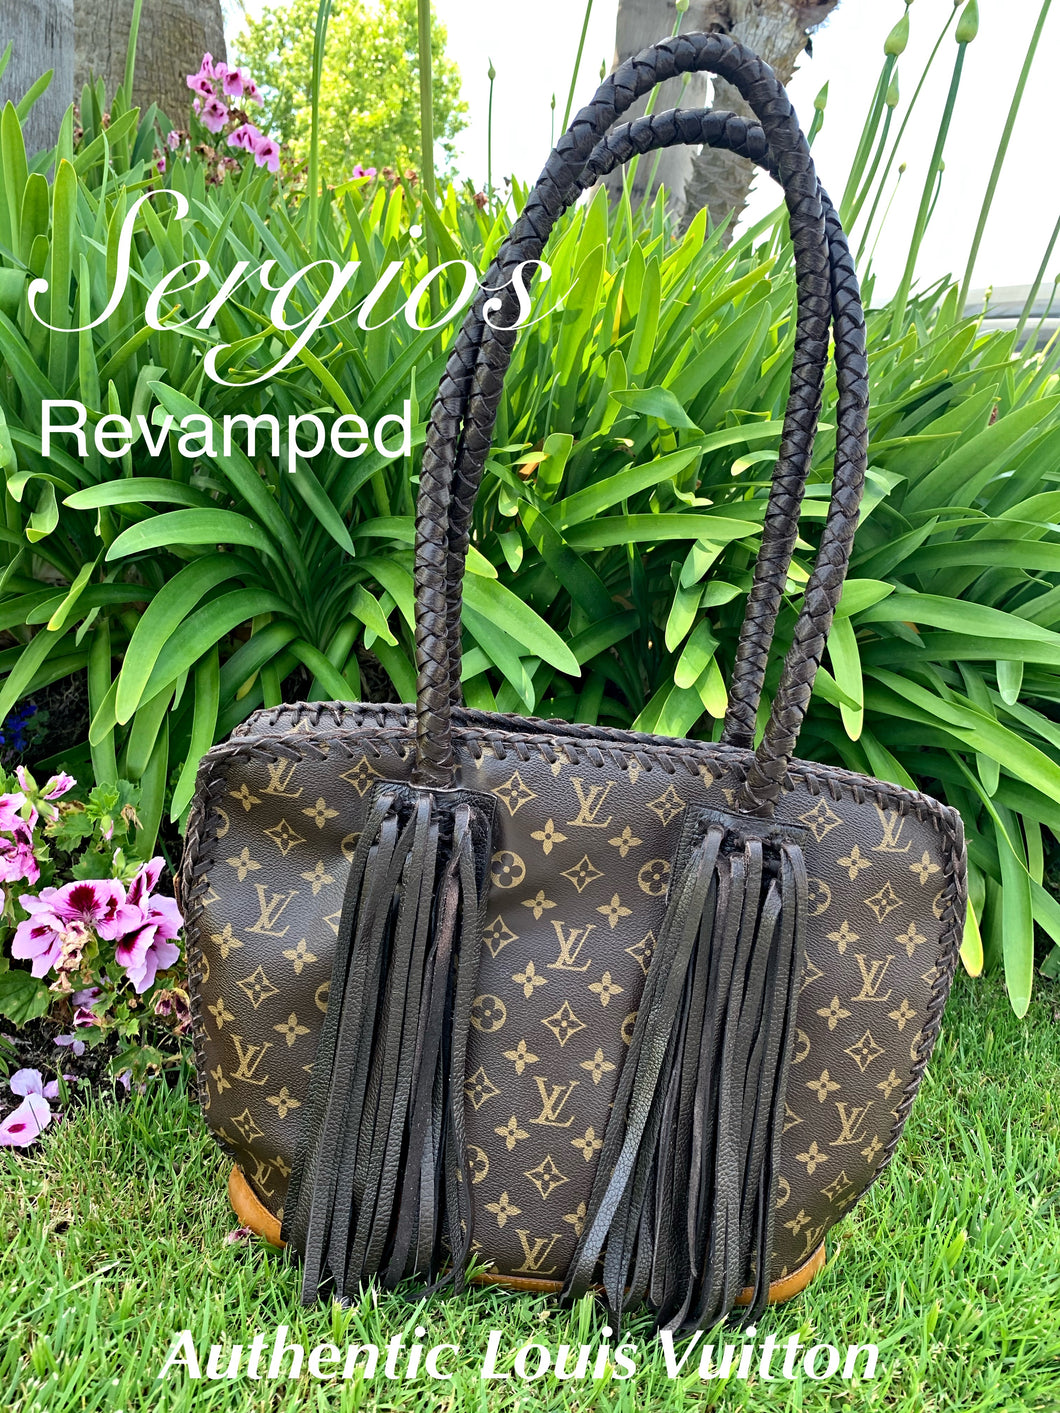 Louis Vuitton, 100 % authentic preowned and revamped by Sergios Collection